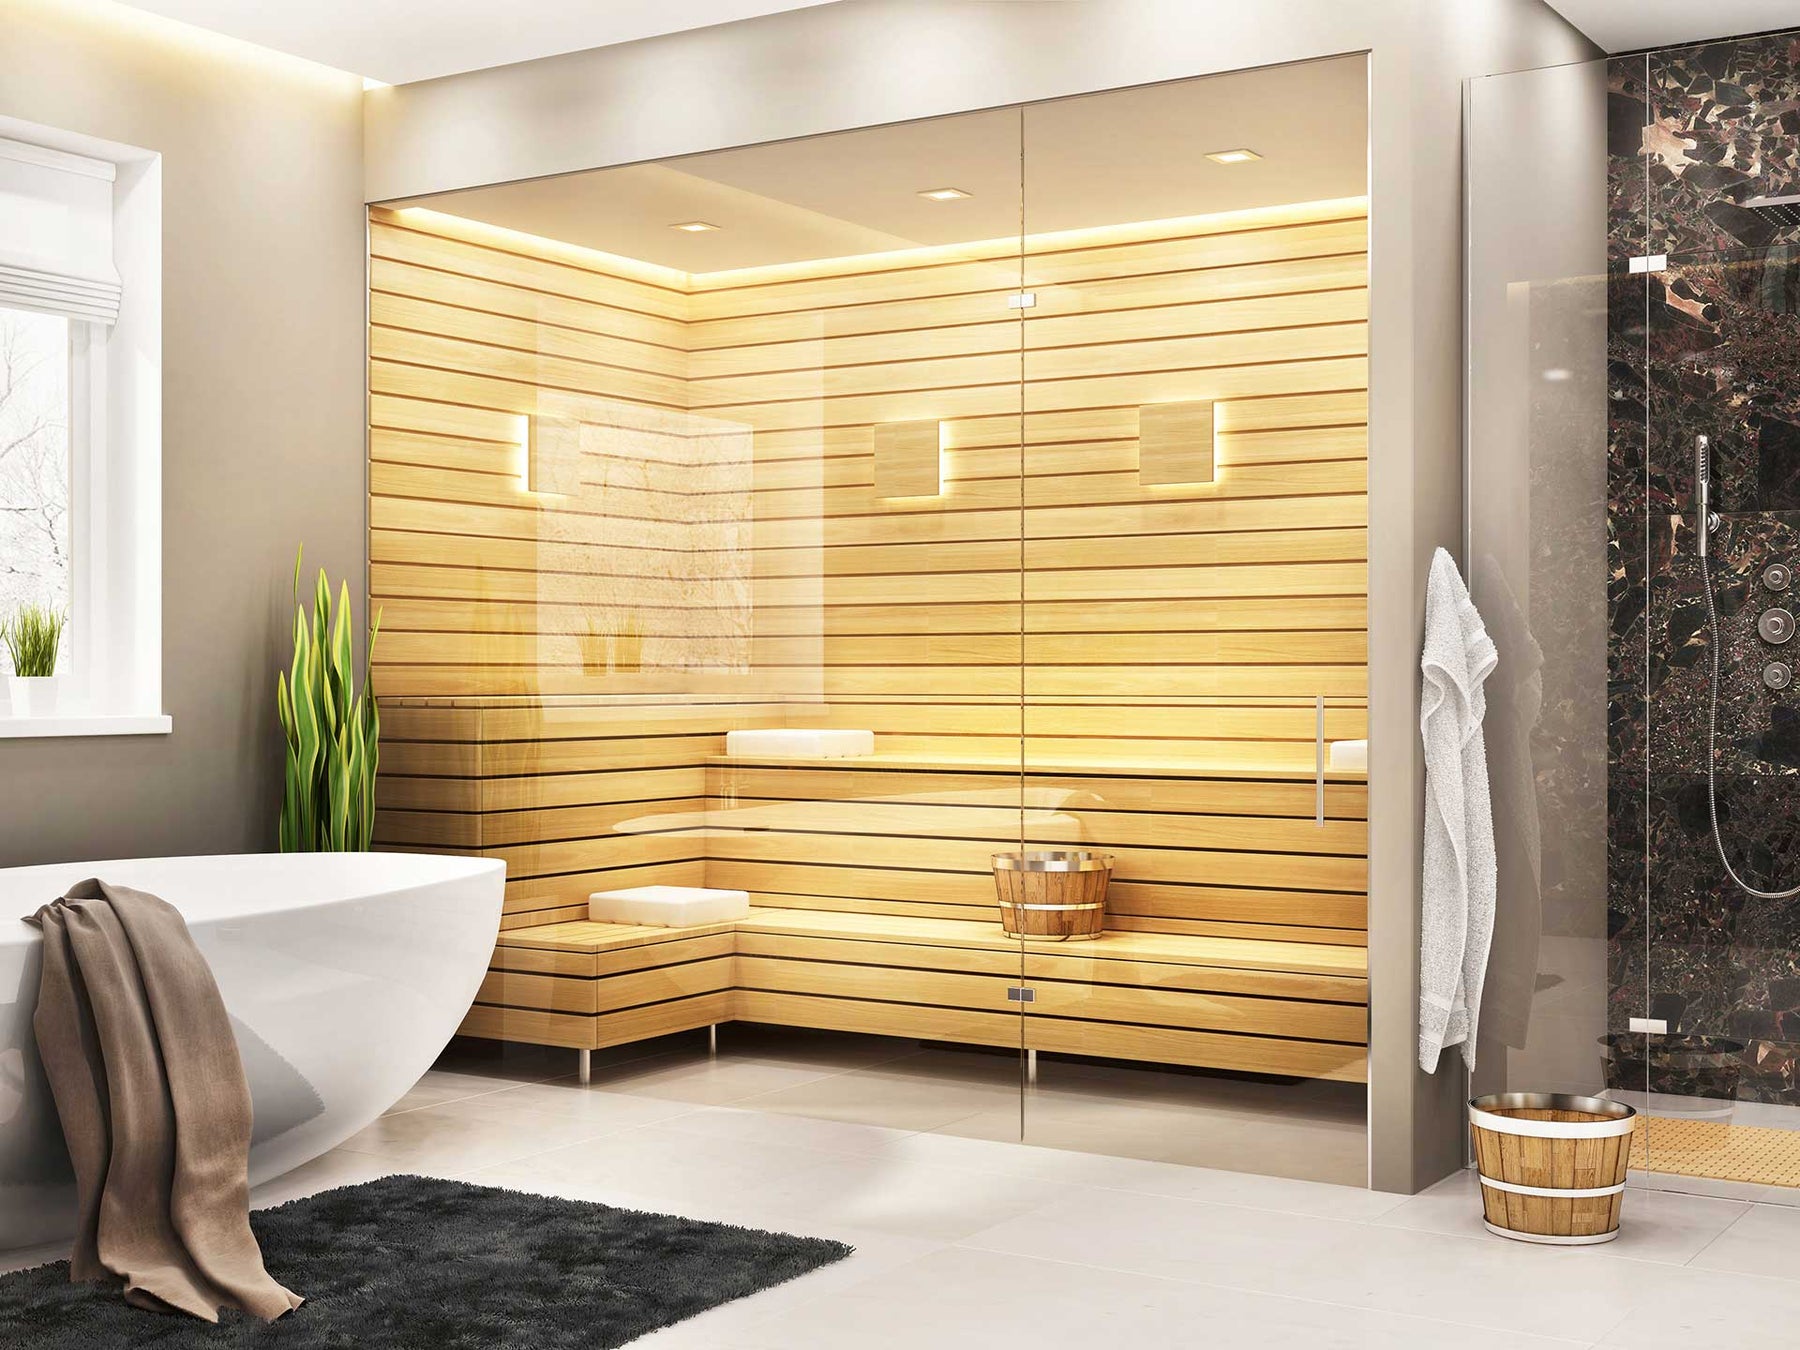 How to Add a Glass Wall to Your Sauna: Step-by-Step Guide